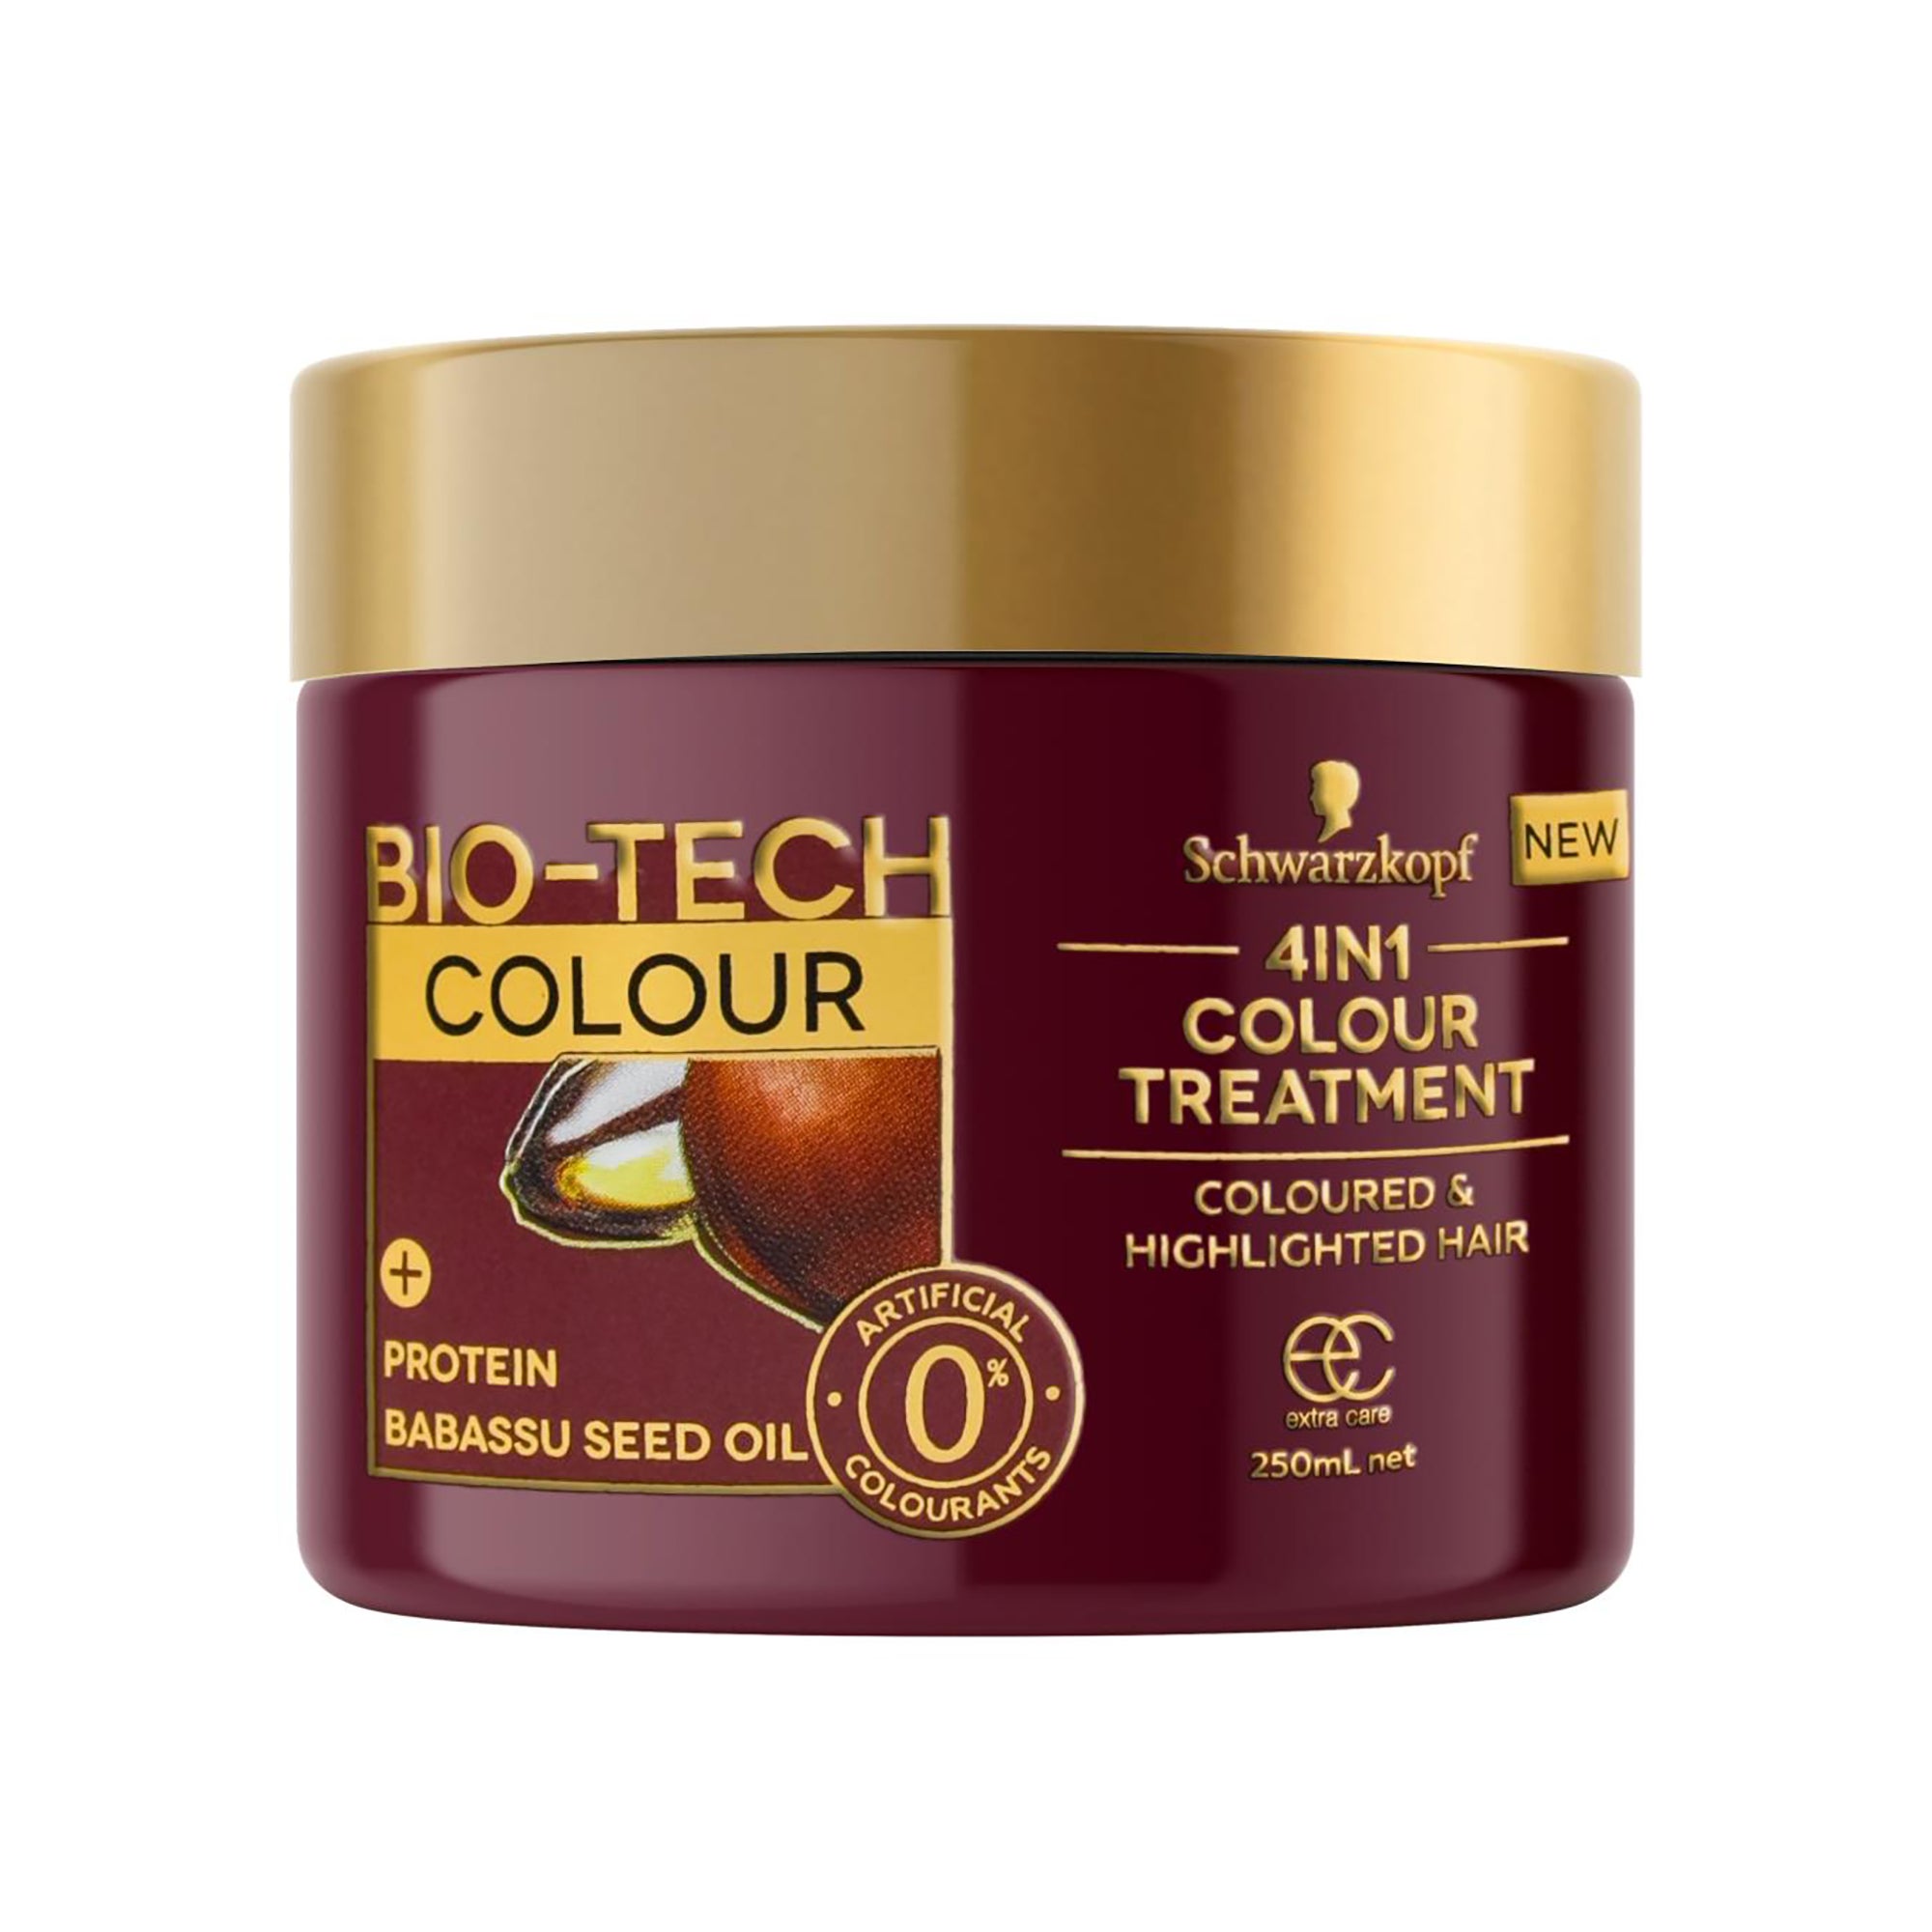 Schwarzkopf Bio-tech 4-in-1 Colour Treatment Protein Babassu Seed Oil 250ml  | Hair Care | Product